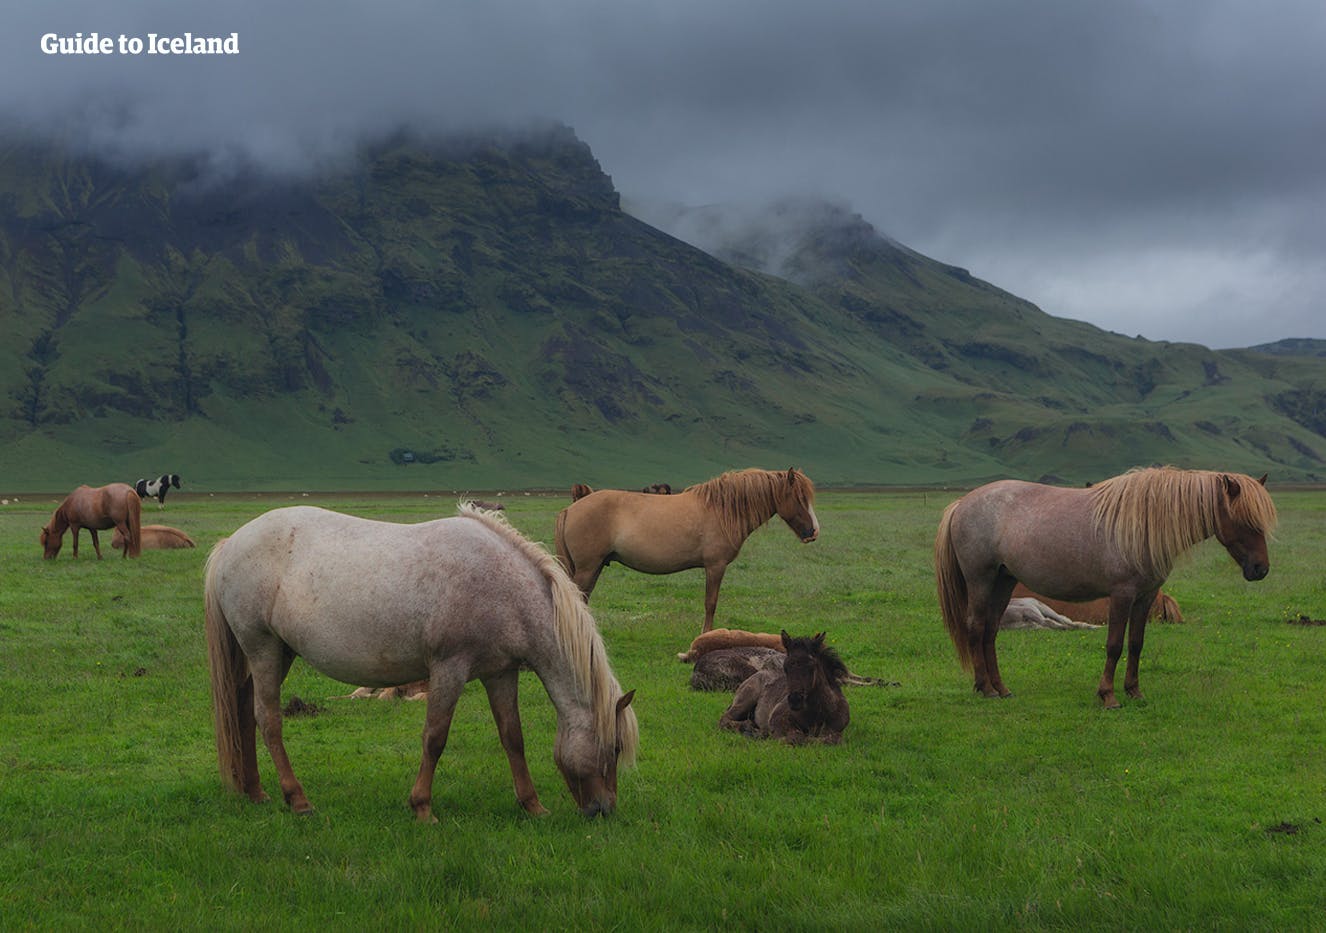 Iceland horses are known for being intelligent, sociable, curious and sweet.